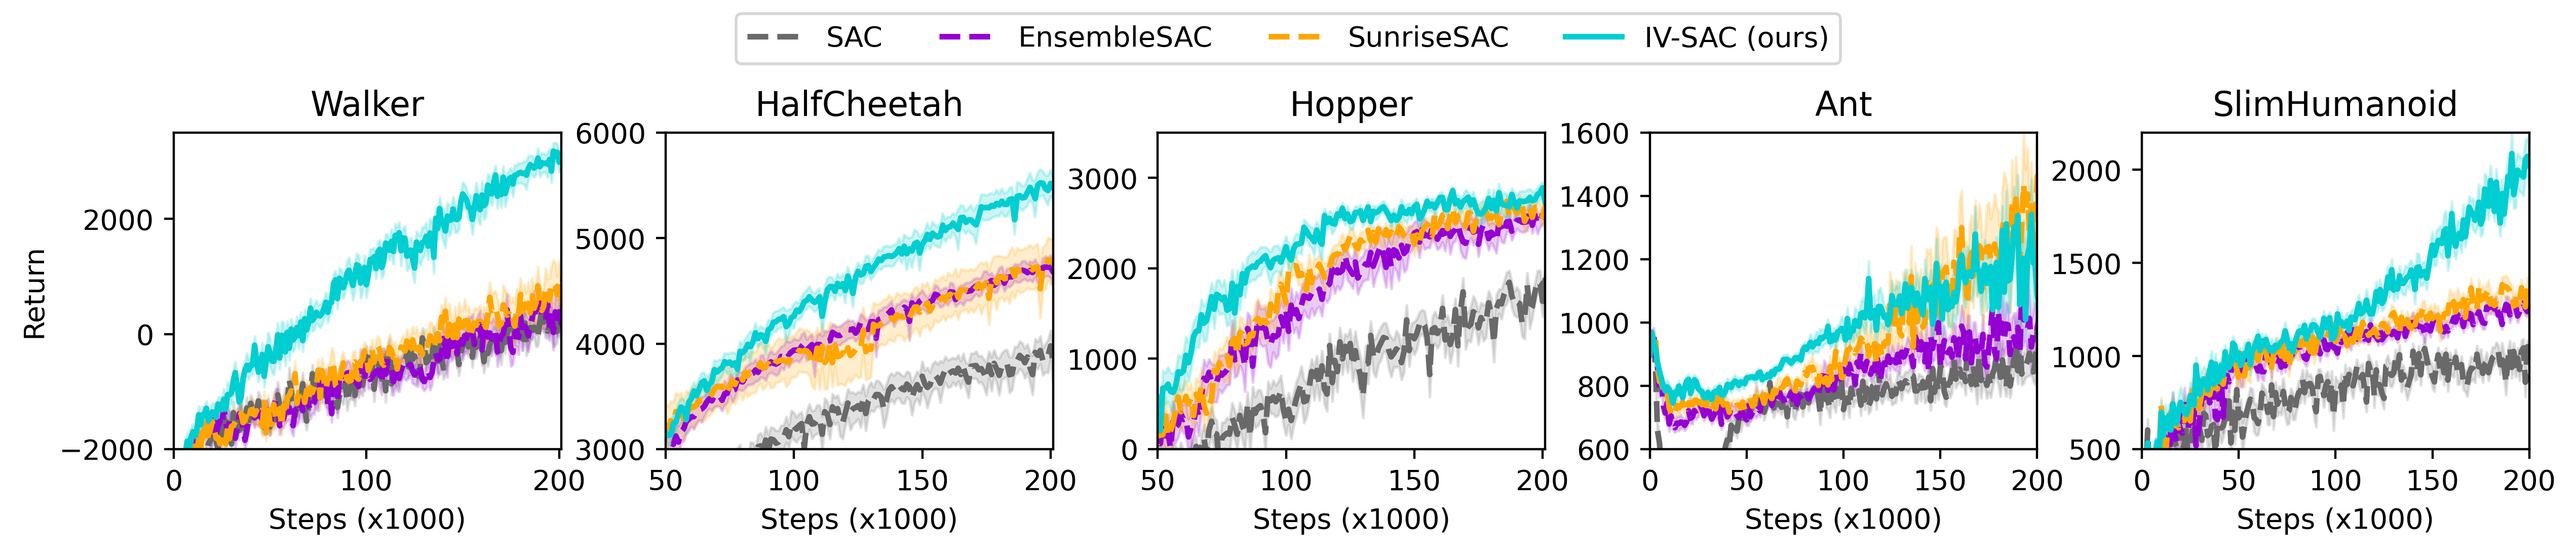 A plot showing learning curves, where IV-SAC is doing better than DQN and other ensemble baselines.